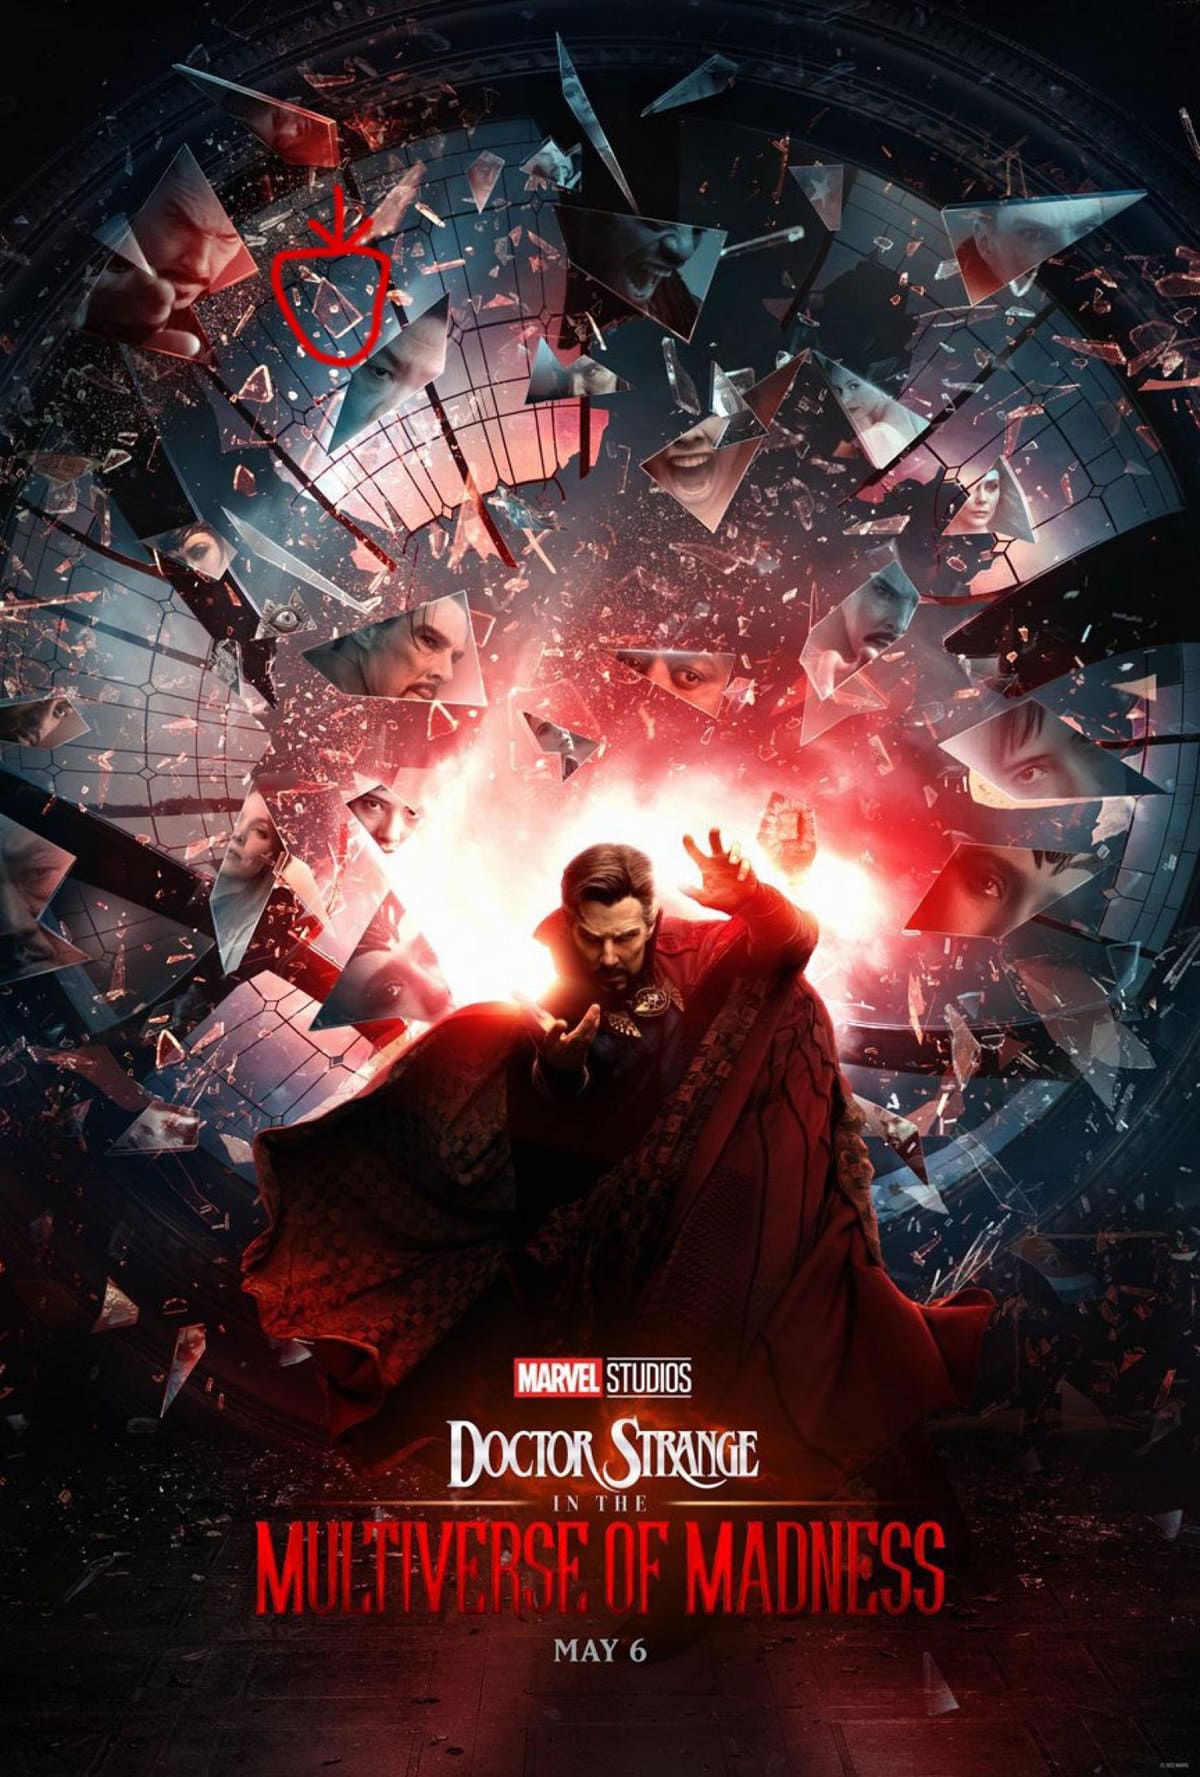 Doctor-Strange-2-In-The-Multiverse-Of-Madness-Poster-Deadpool